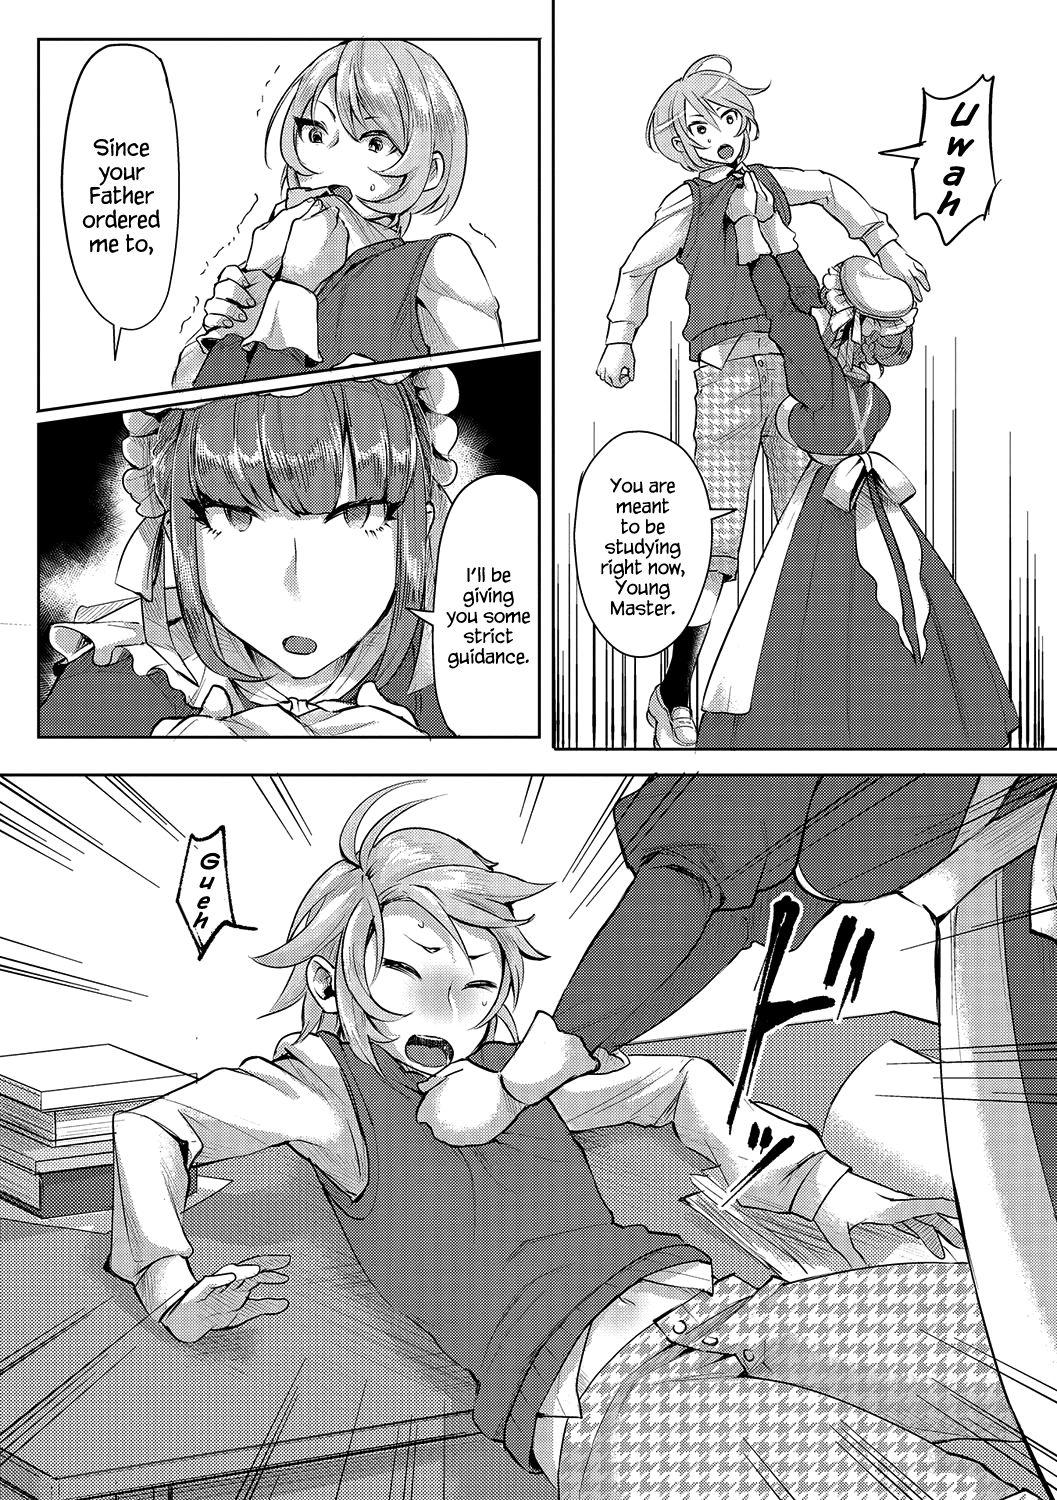 Piss Bocchama no Aibou Maid | The Young Master’s Partner Maid Real Amateur - Page 4